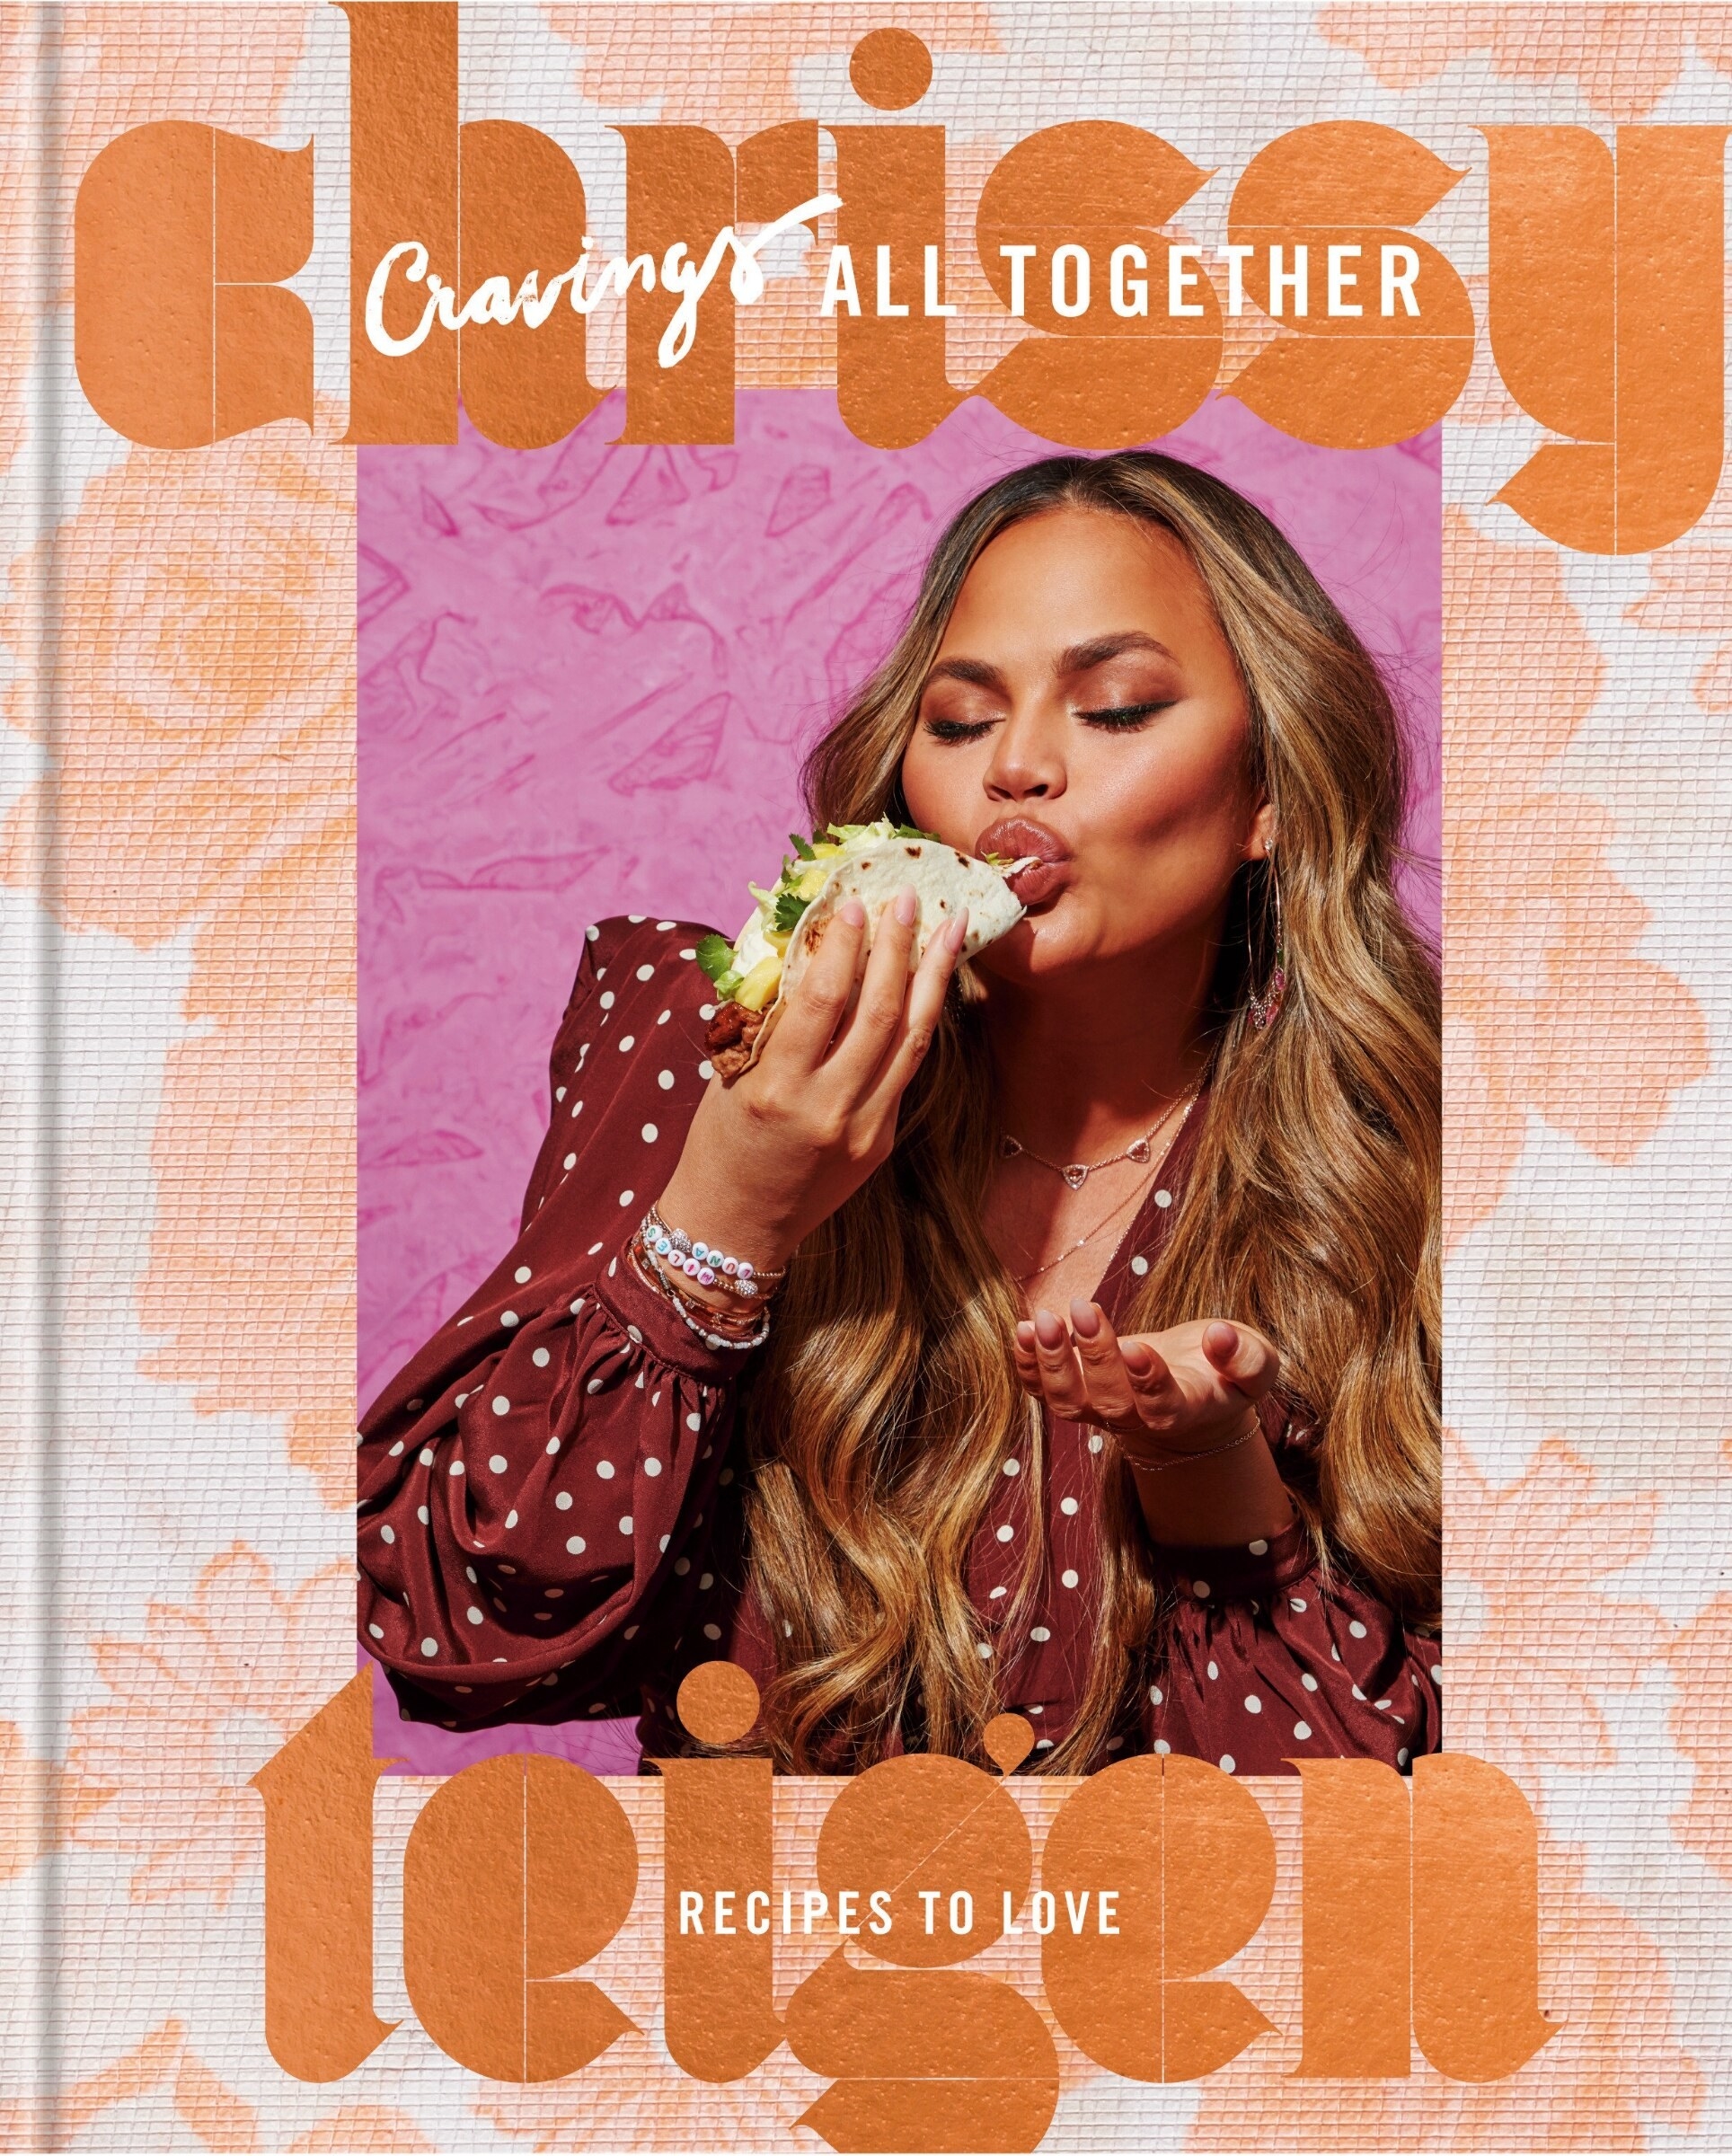 The cover of the cookbook with a picture of Chrissy Teigen eating a taco